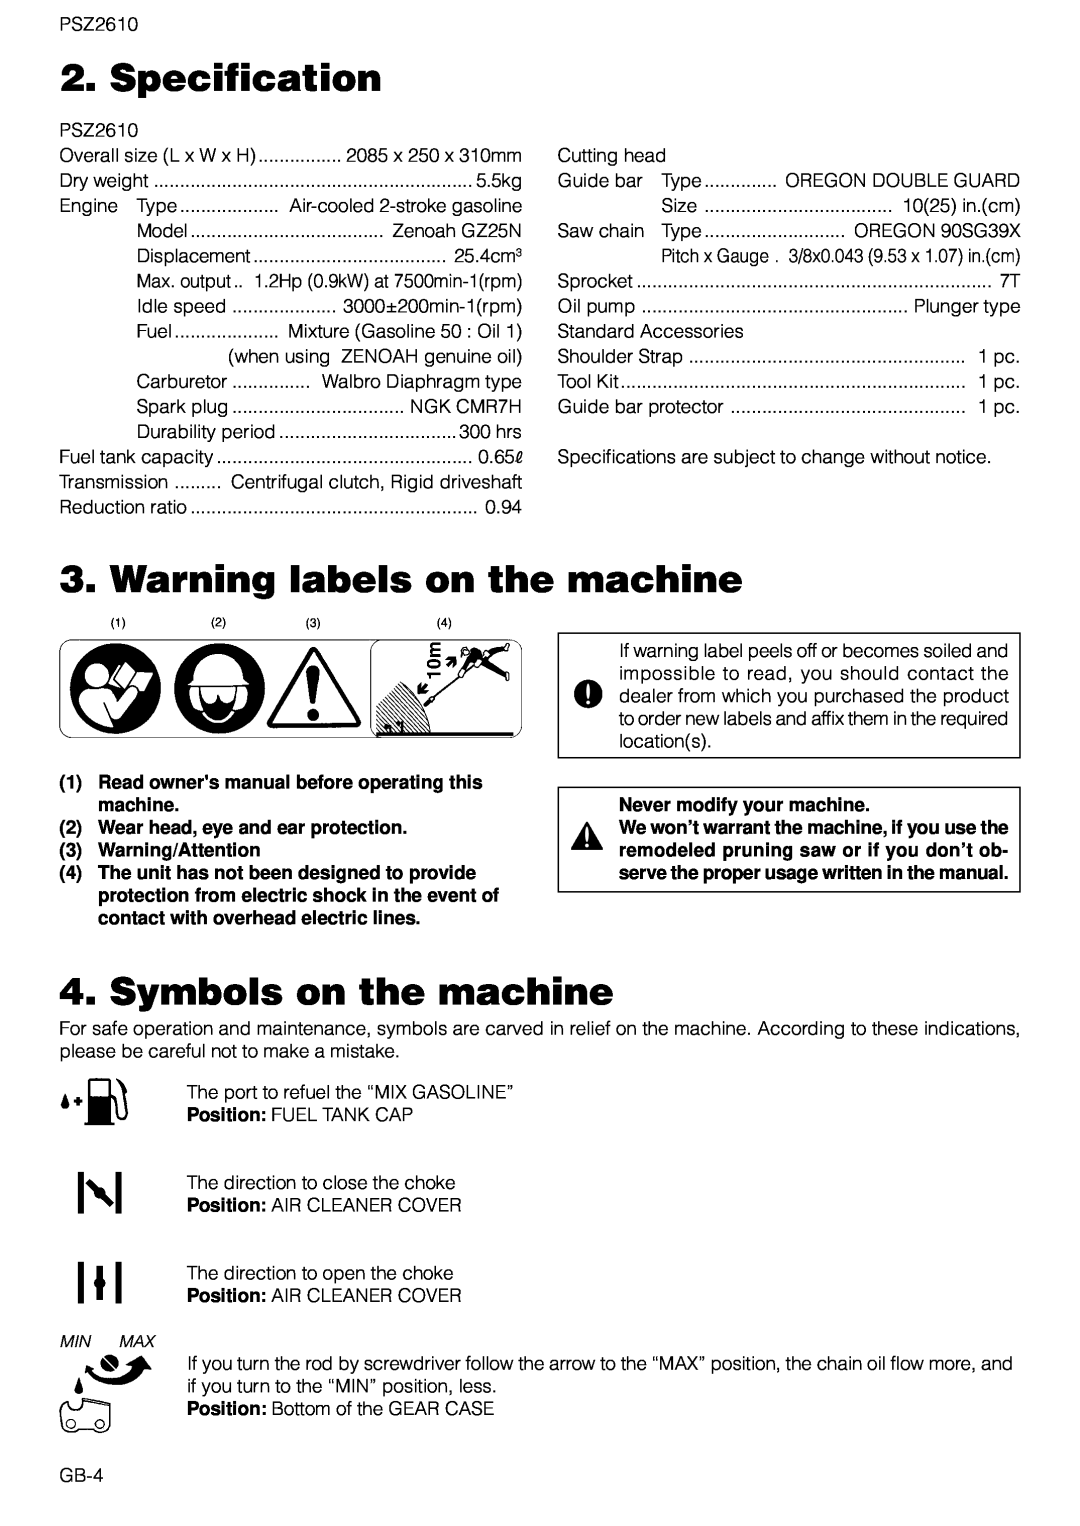 Zenoah PSZ2610 owner manual Specification, Warning labels on the machine, Symbols on the machine, Never modify your machine 